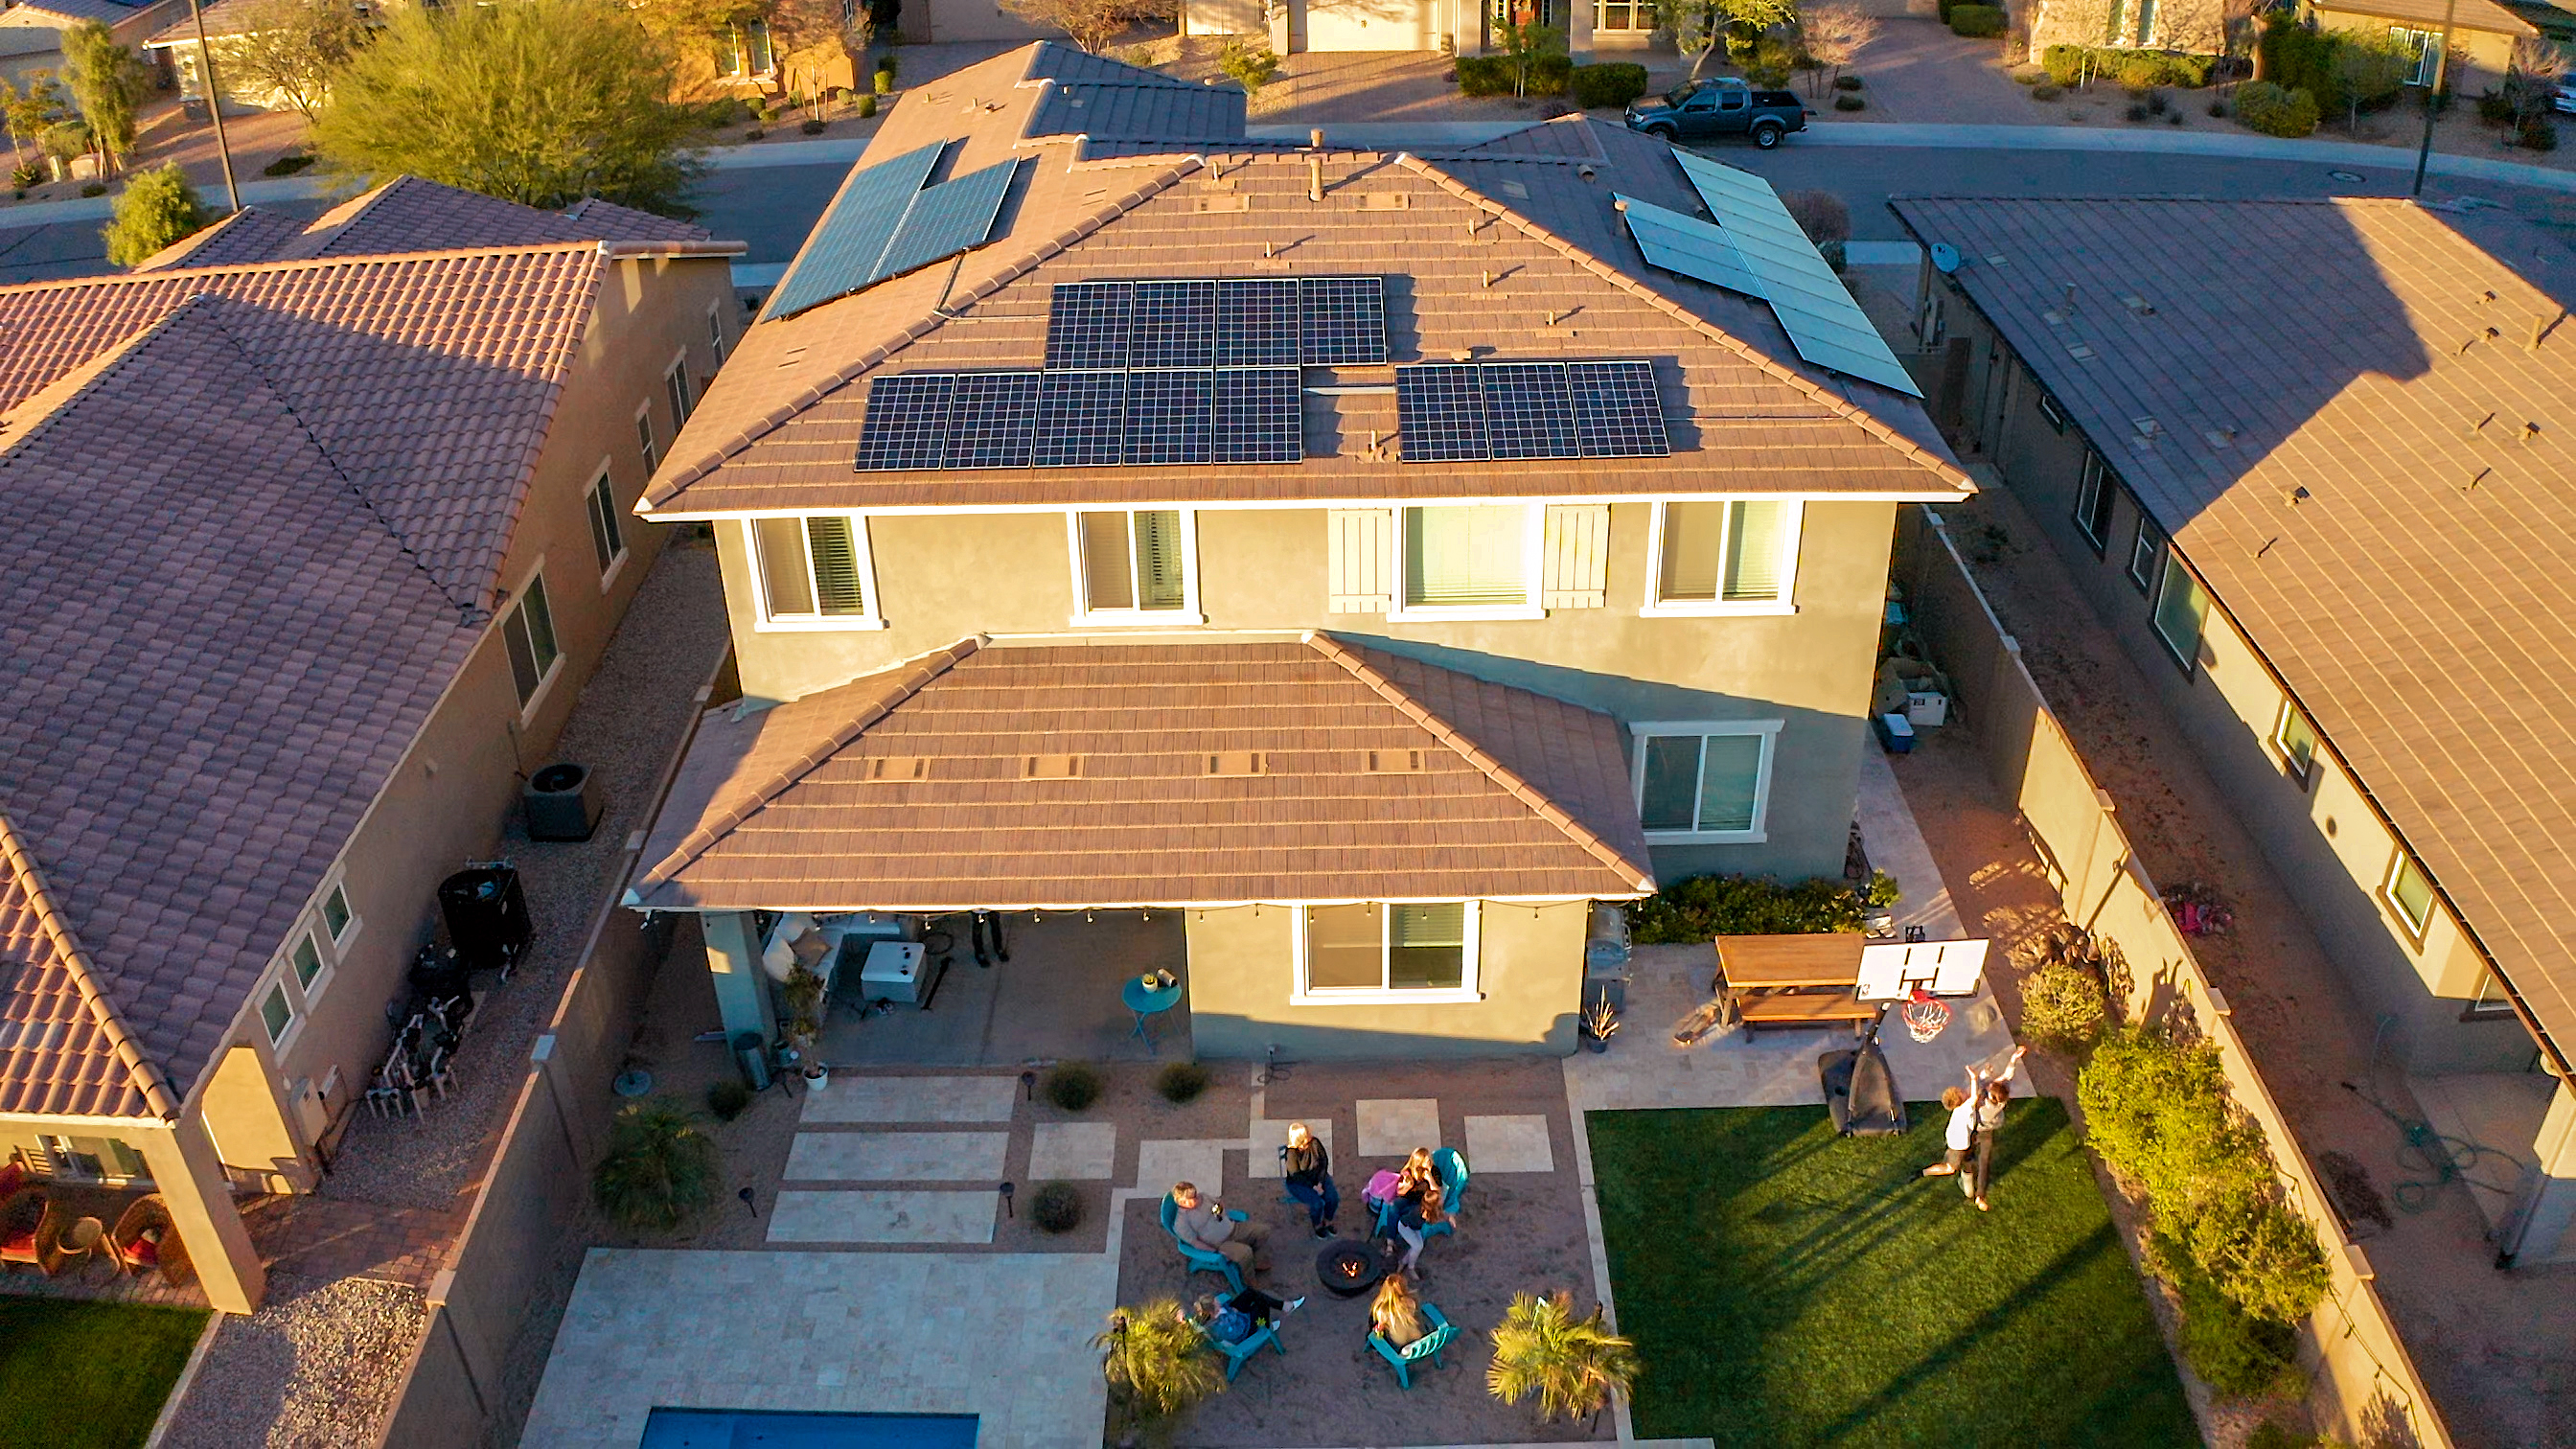 back yard of two story house at sunset with solar panels and solar battery